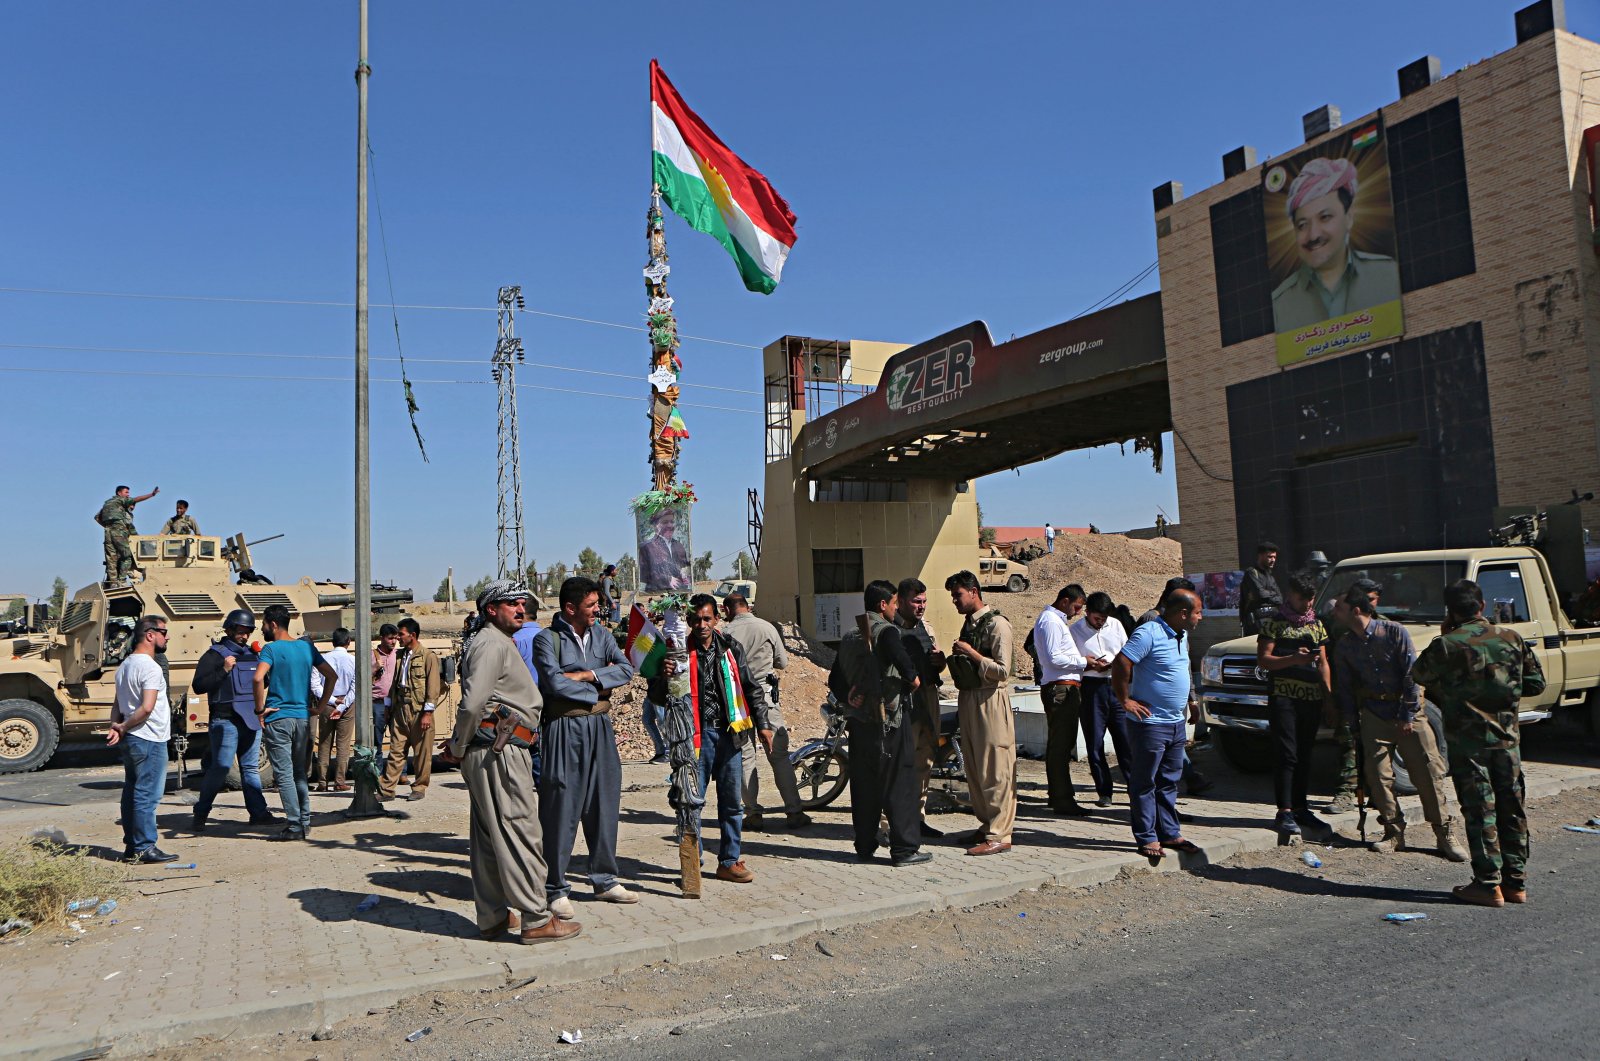 A picture of Massoud Barzani, the then-President of KRG, is displayed as security forces stand guard in Altun Kupri, on the outskirts of Irbil, Iraq, Thursday, Oct. 19, 2017. (AP File Photo)